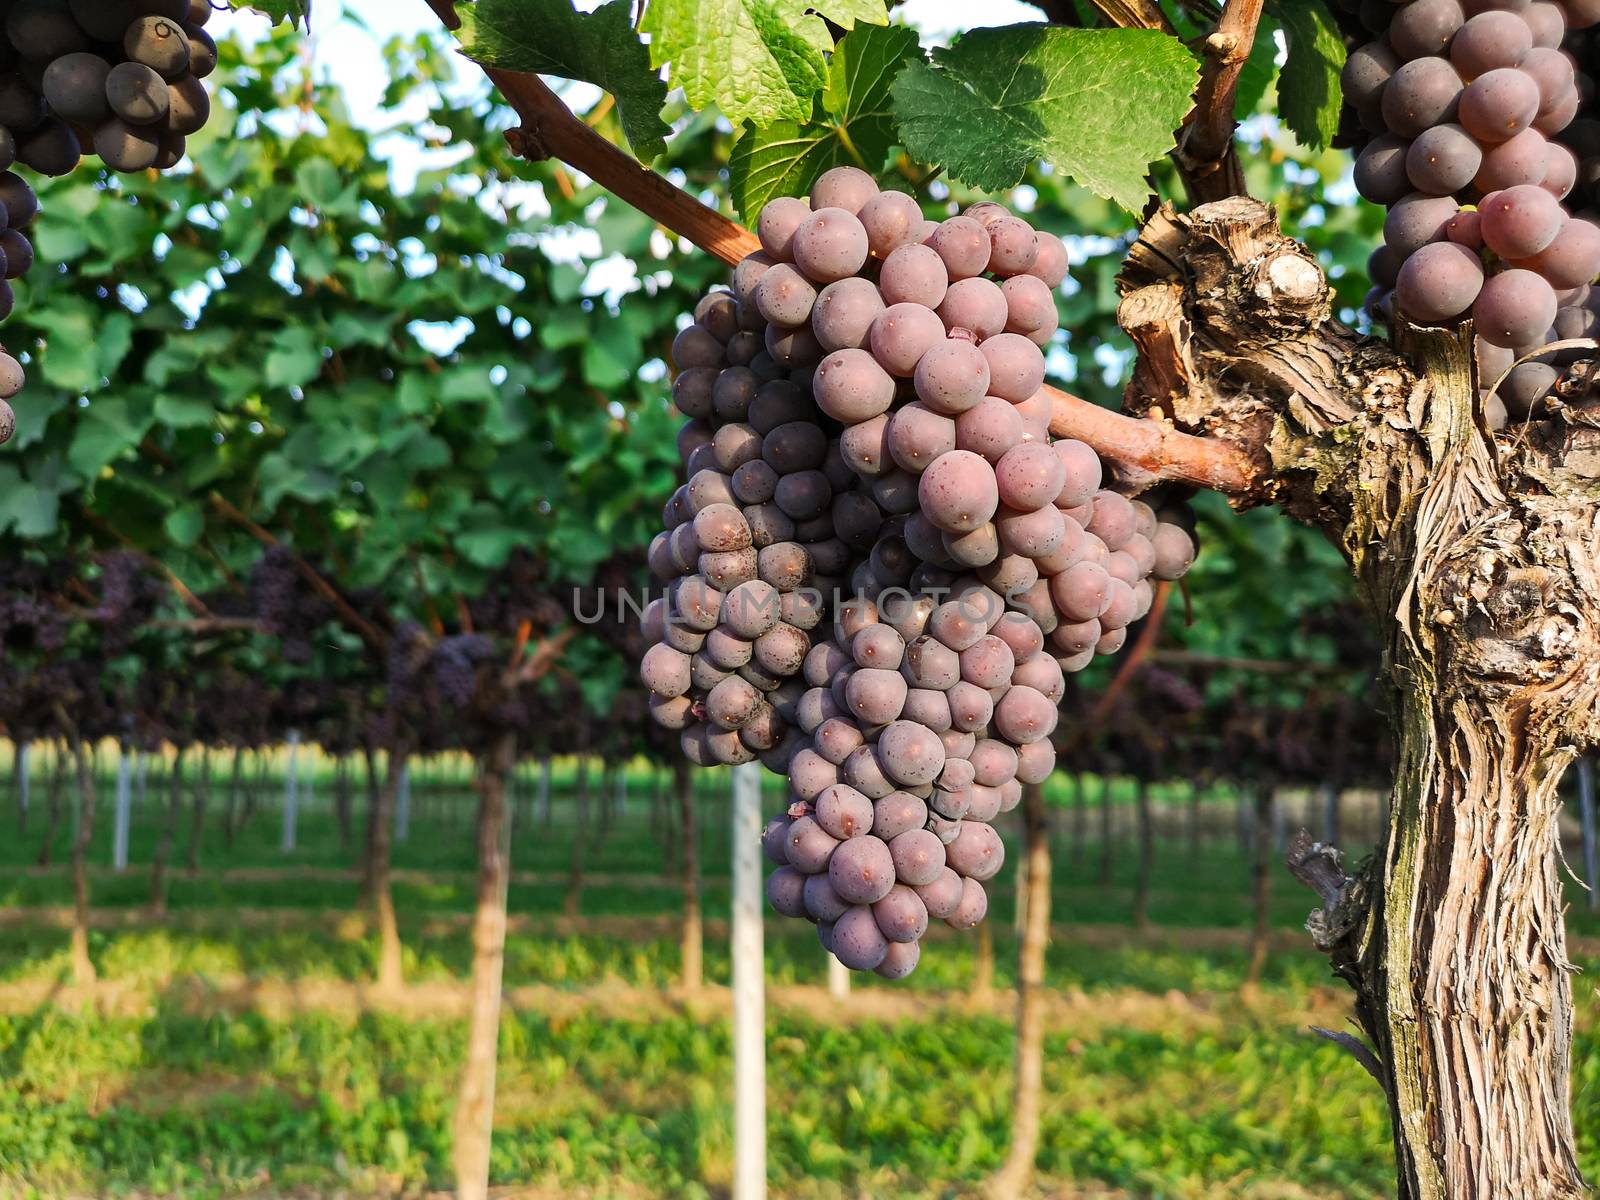 Bunches of ripe purple red grapes hanging on vineyards of grape trees, fresh fruits